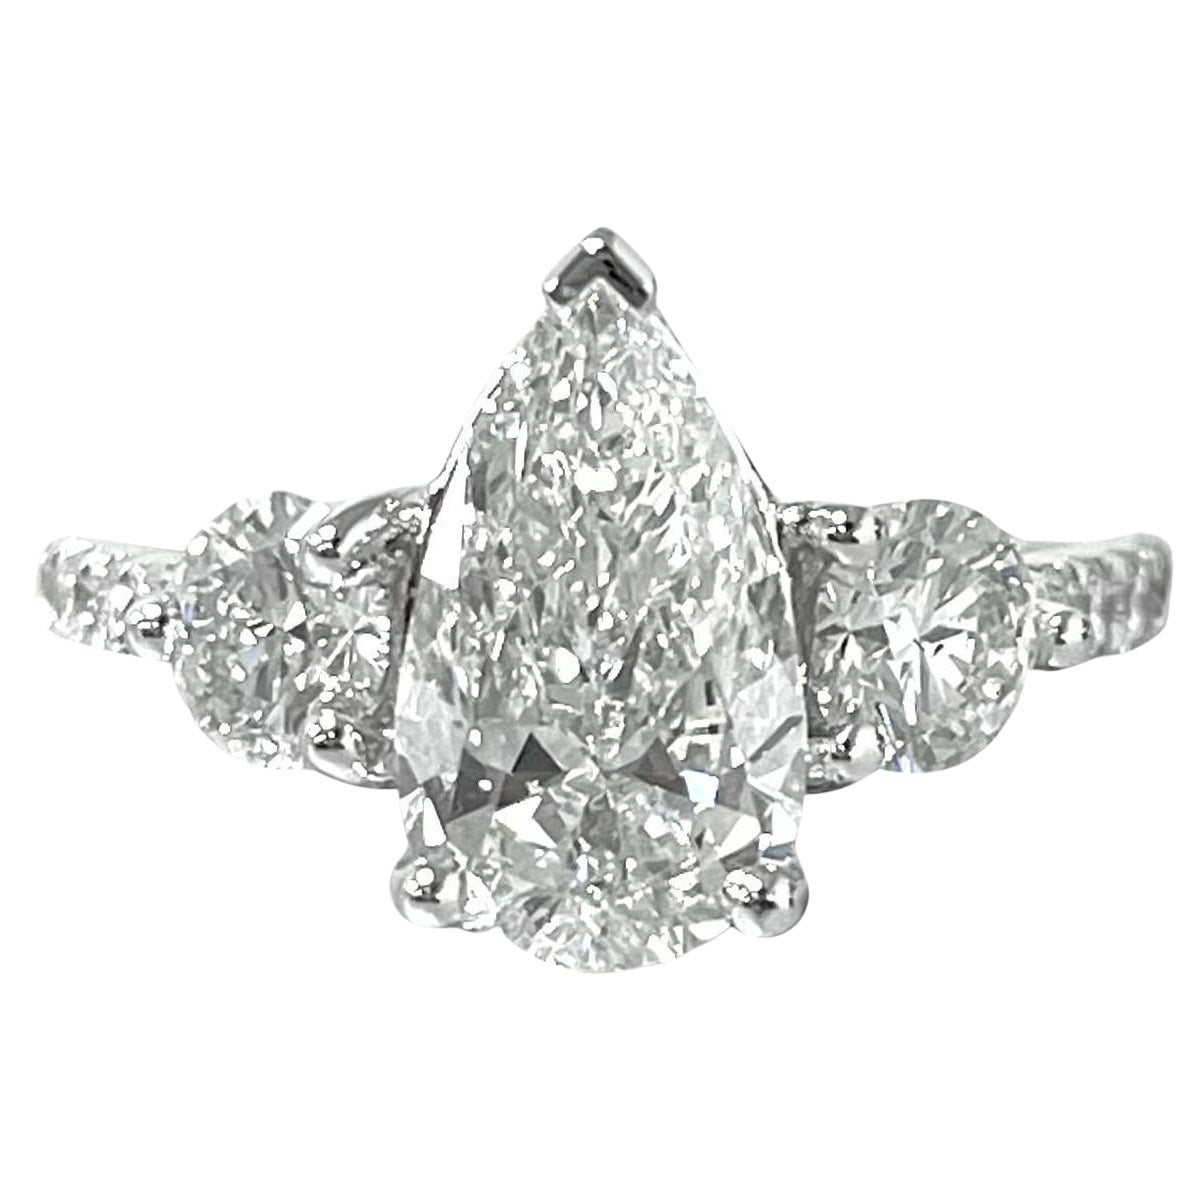 Beauvince Reina Engagement Ring '1.50 ct Pear Shape ISI1 GIA Diamond'